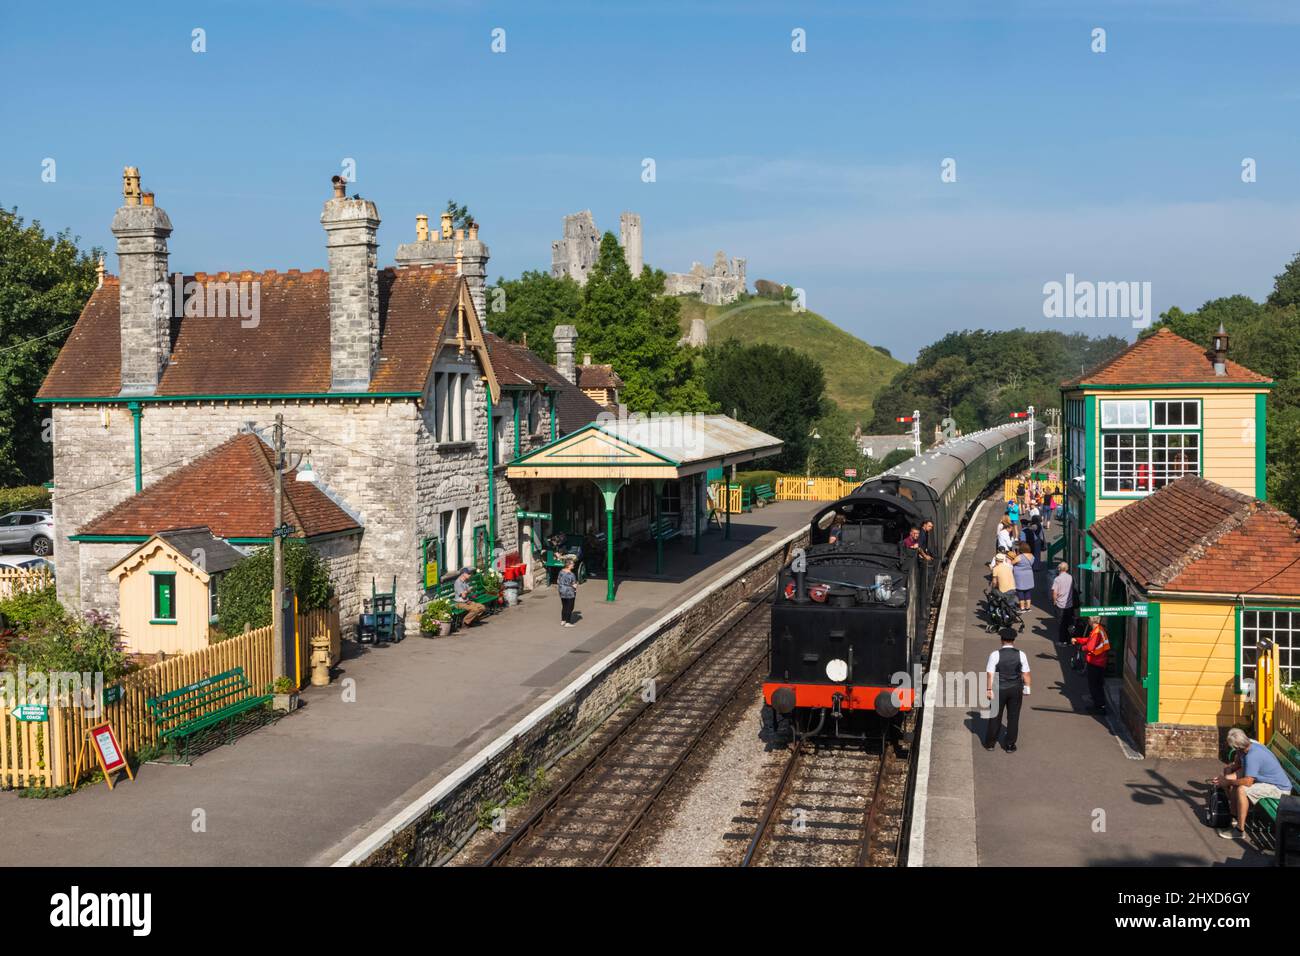 England, Dorset, Isle of Purbeck, Corfe Castle, The Historic Railway Station and Steam Train Stock Photo